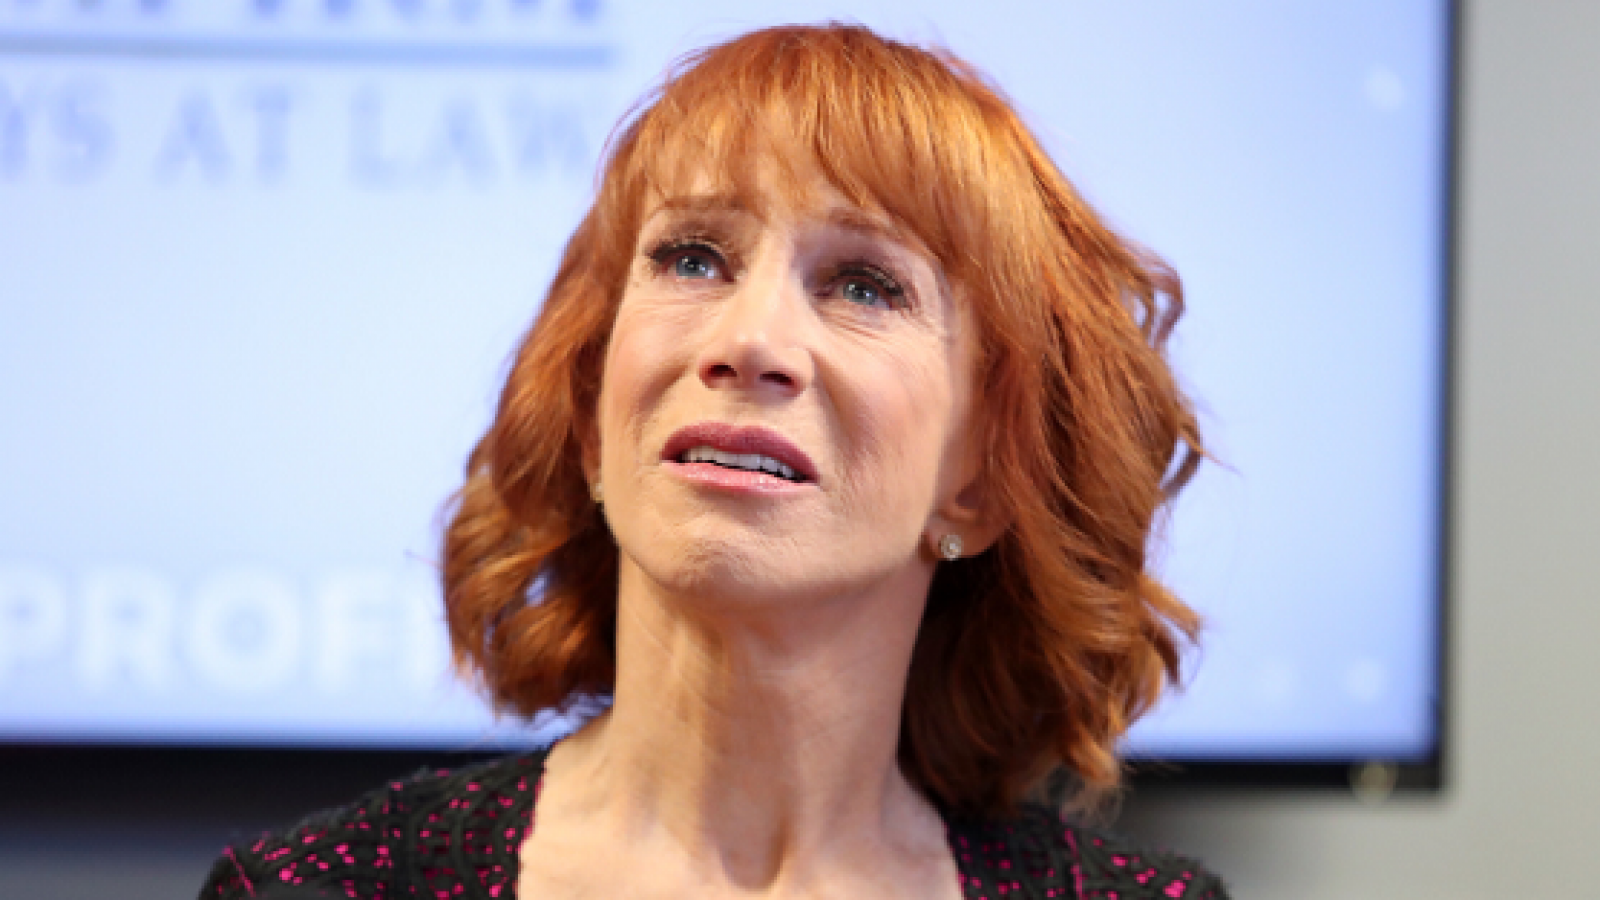 Kathy Griffin May Have Permanent Damage From Her Cancer Treatment